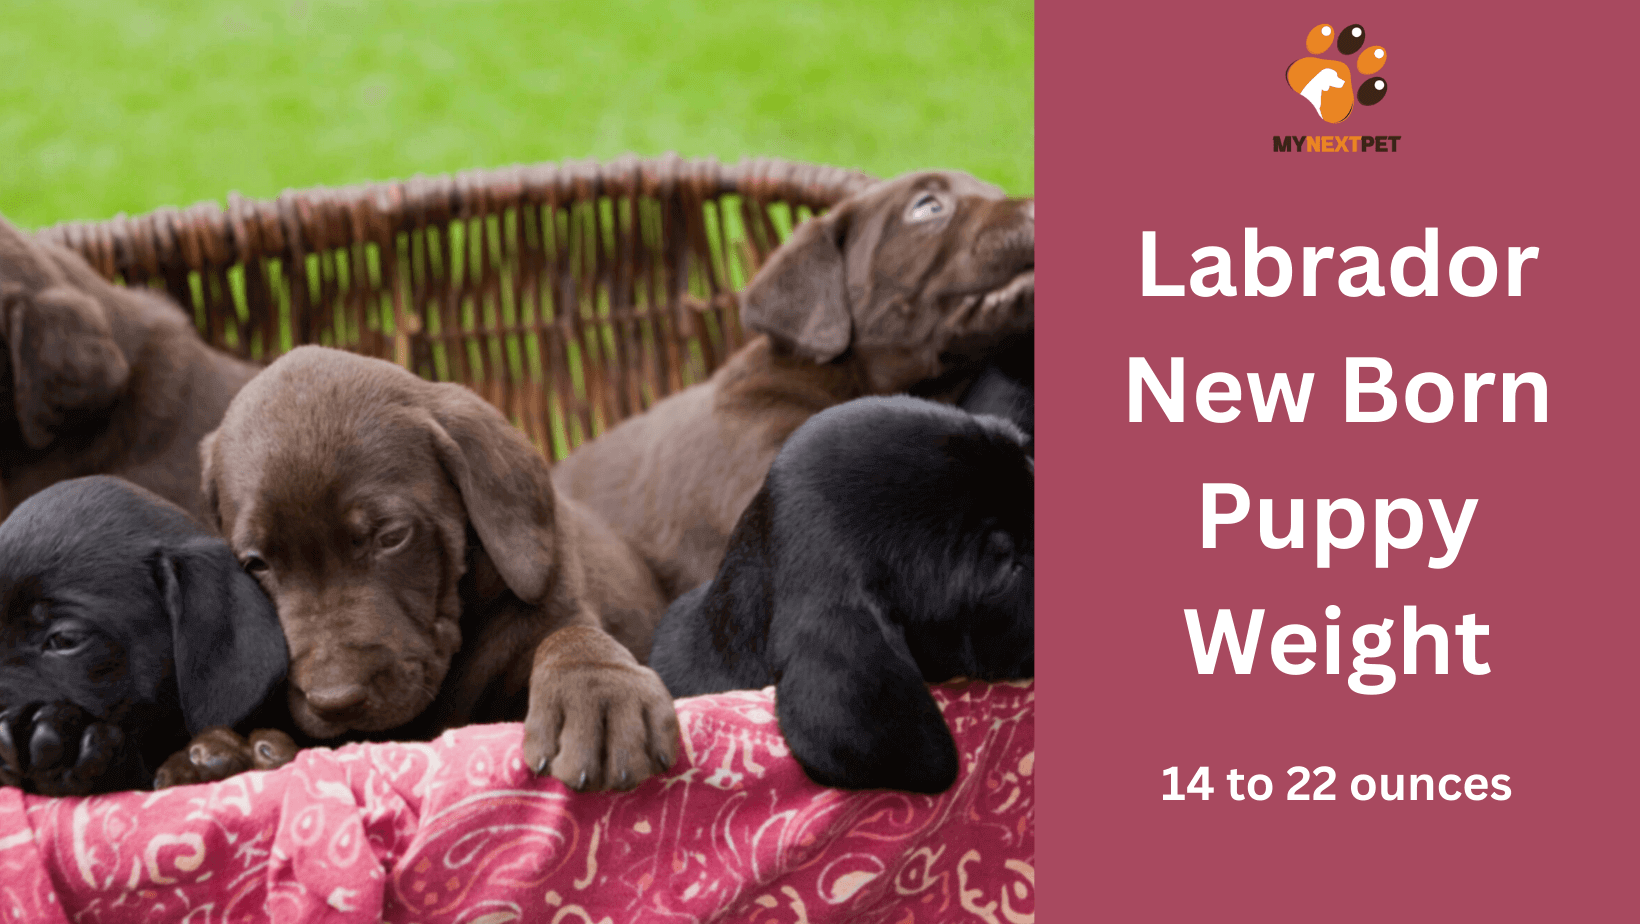 how much does a labrador puppy weight